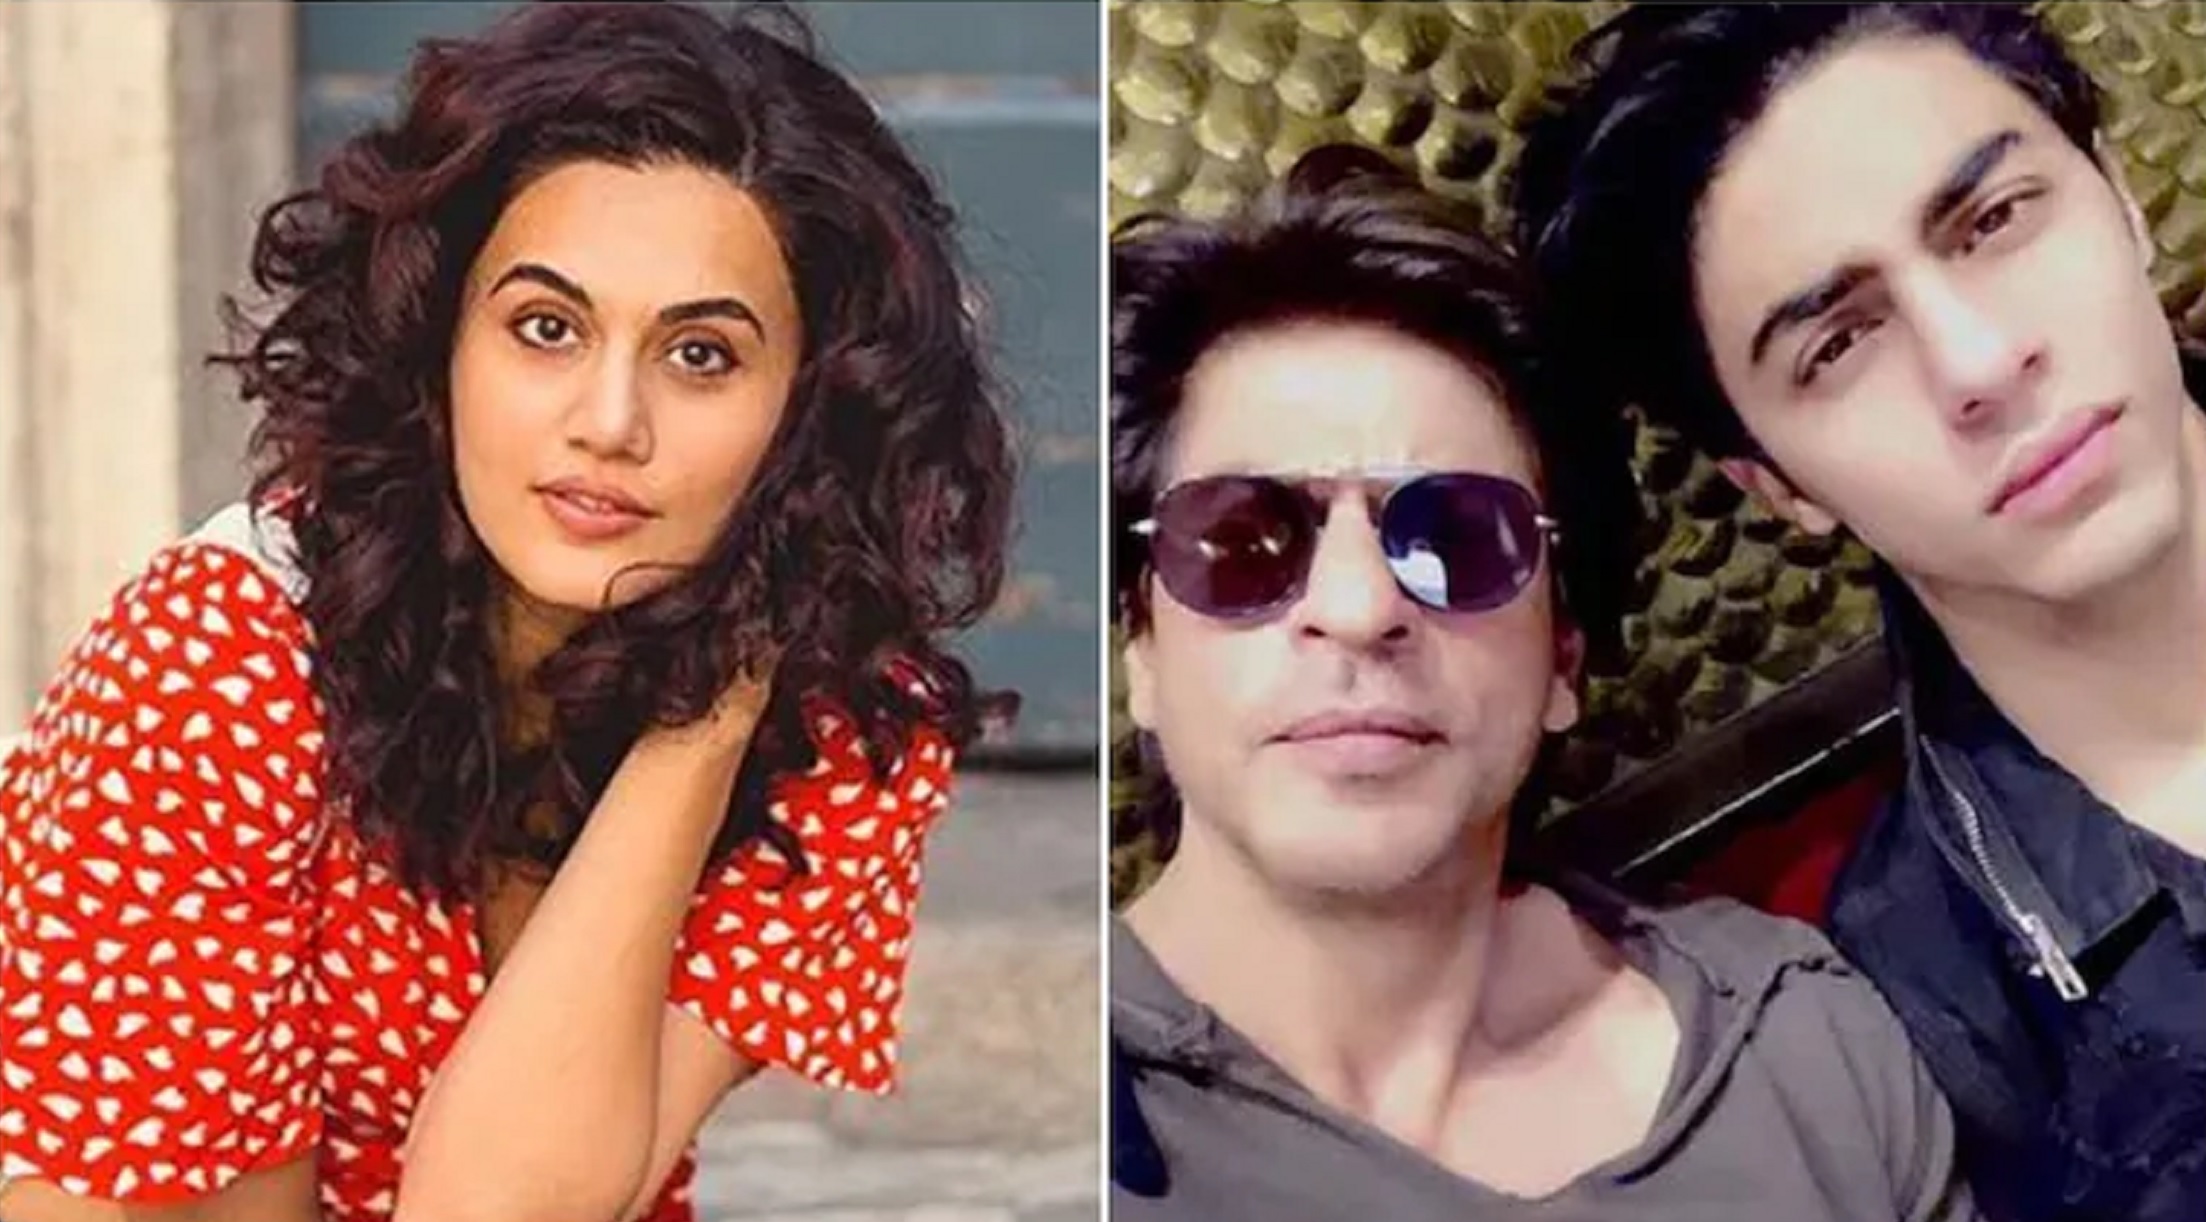 Taapsee Pannu On Aryan Khan Arrest: “Celebrities face the brunt of things more than anybody else”